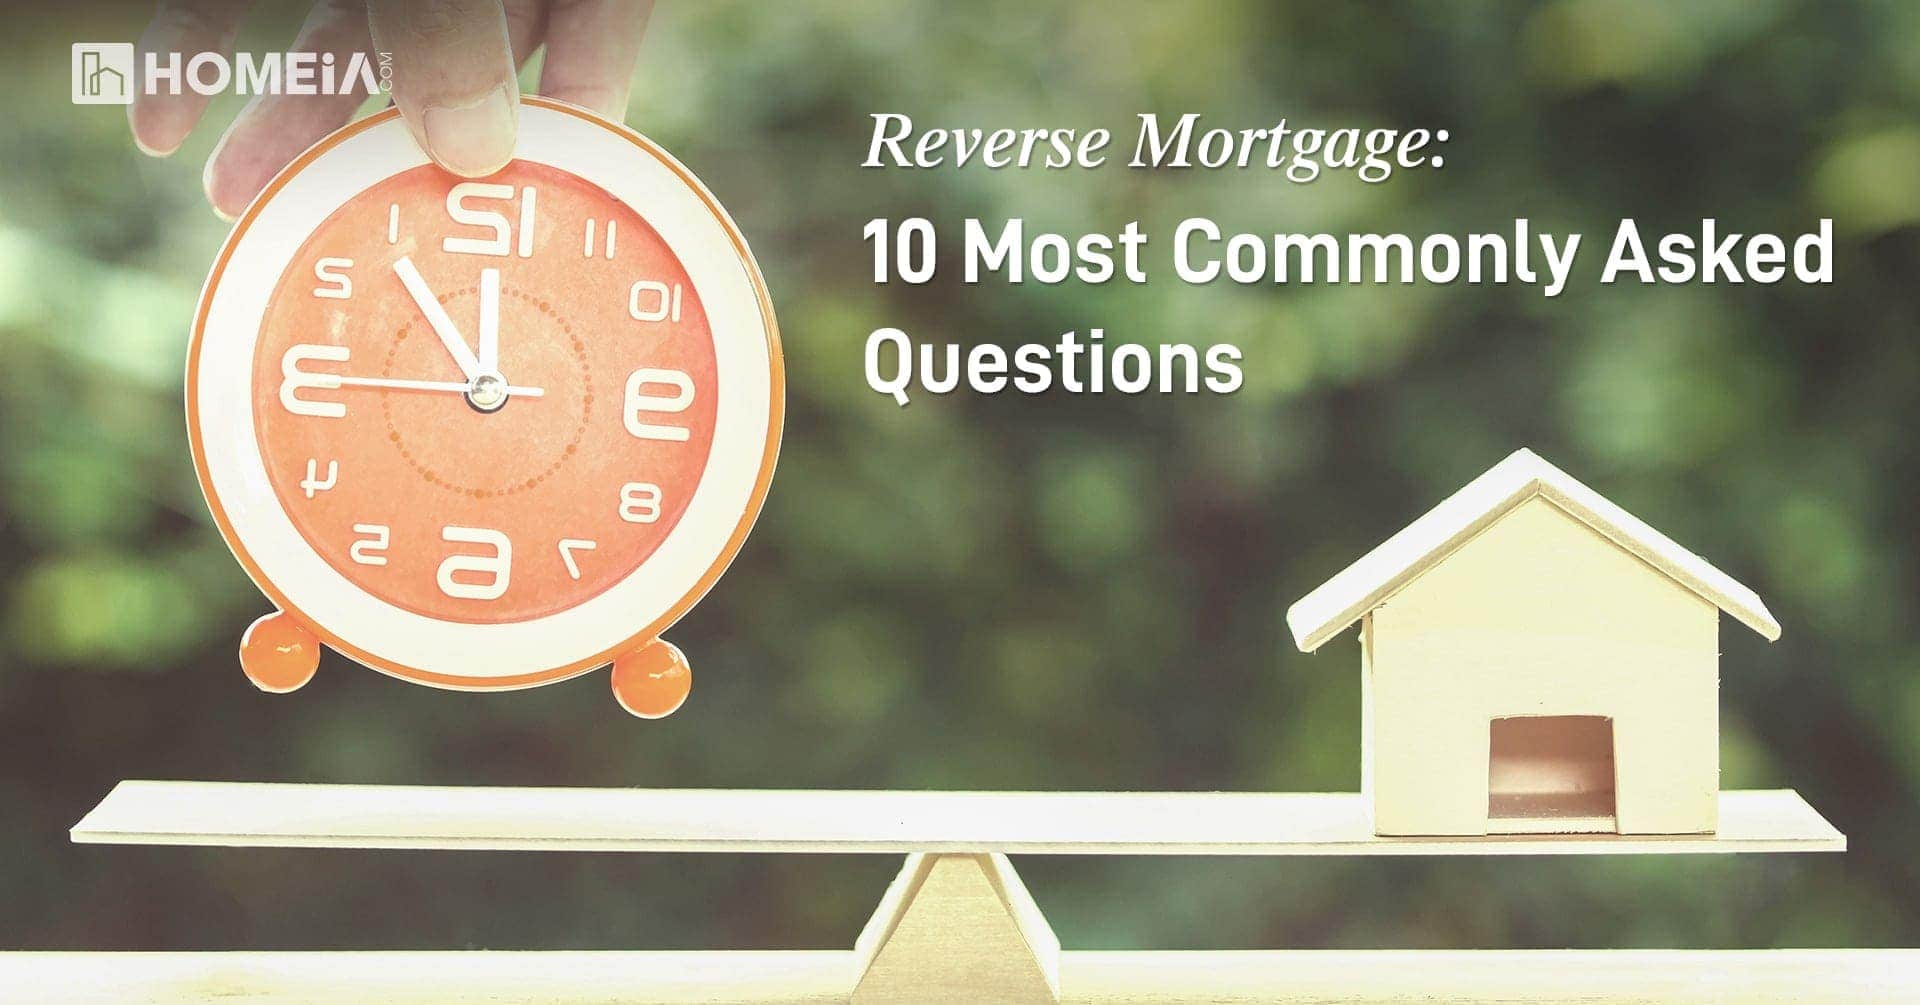 Reverse Mortgage: 10 Most Commonly Asked Questions